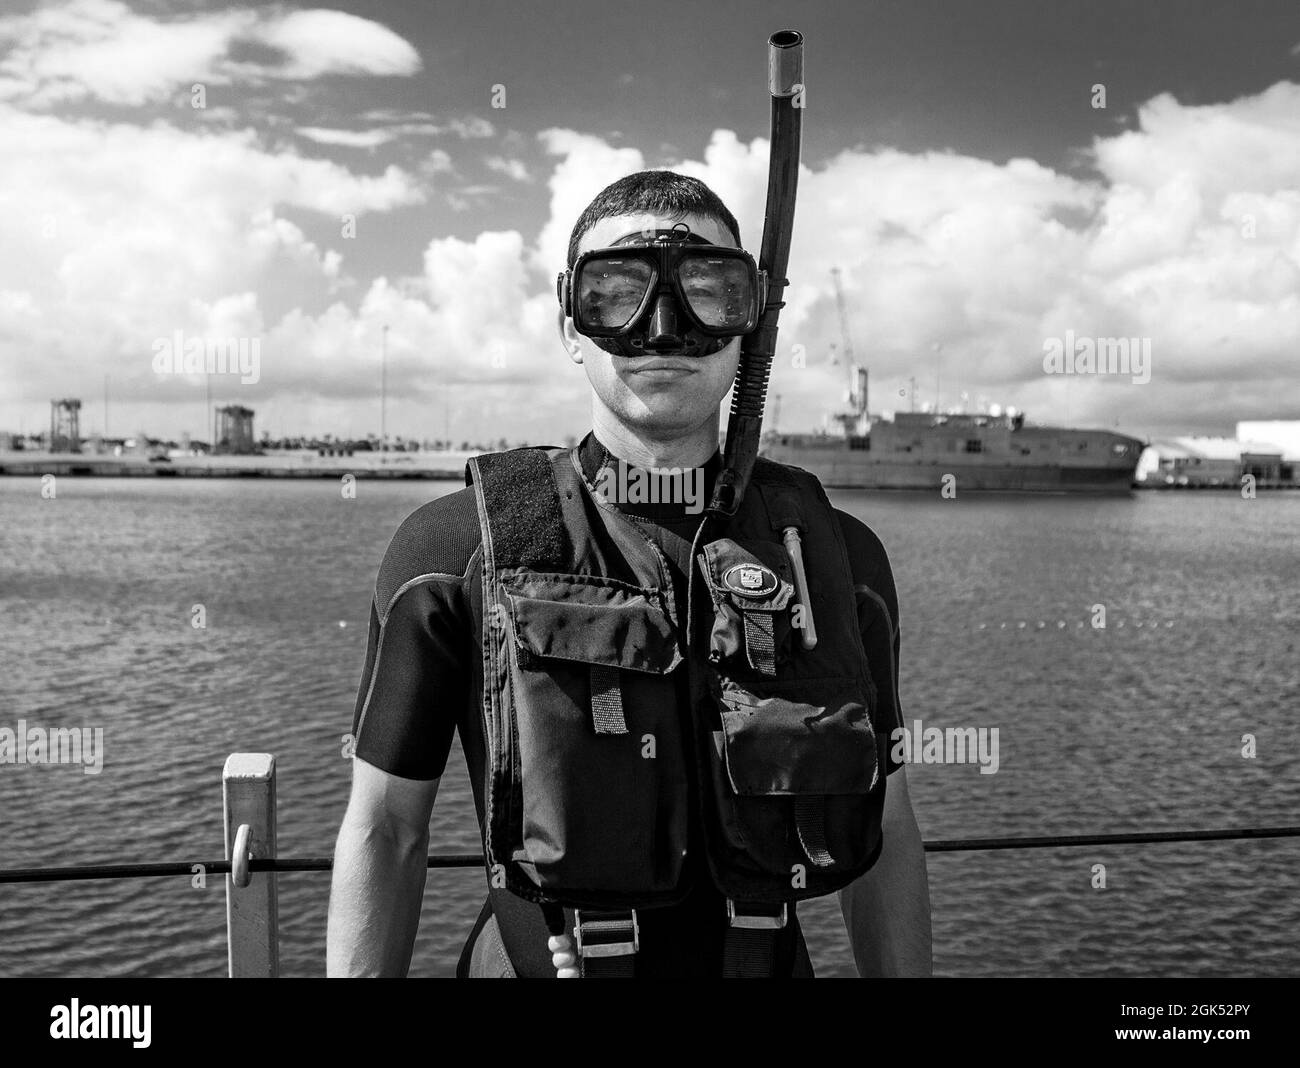 210803-N-KY668-1024   PONCE, Puerto Rico - (Aug. 3, 2021) – Chief Mineman Jonathan Wampler, a search and rescue (SAR) swimmer assigned to the Freedom-variant littoral combat ship USS Billings (LCS 15), poses for a picture while conducting SAR training on the fo’c’sle, Aug. 3, 2021. Billings is deployed to the U.S. 4th Fleet area of operations to support Joint Interagency Task Force South’s mission, which includes counter-illicit drug trafficking missions in the Caribbean and Eastern Pacific. Stock Photo